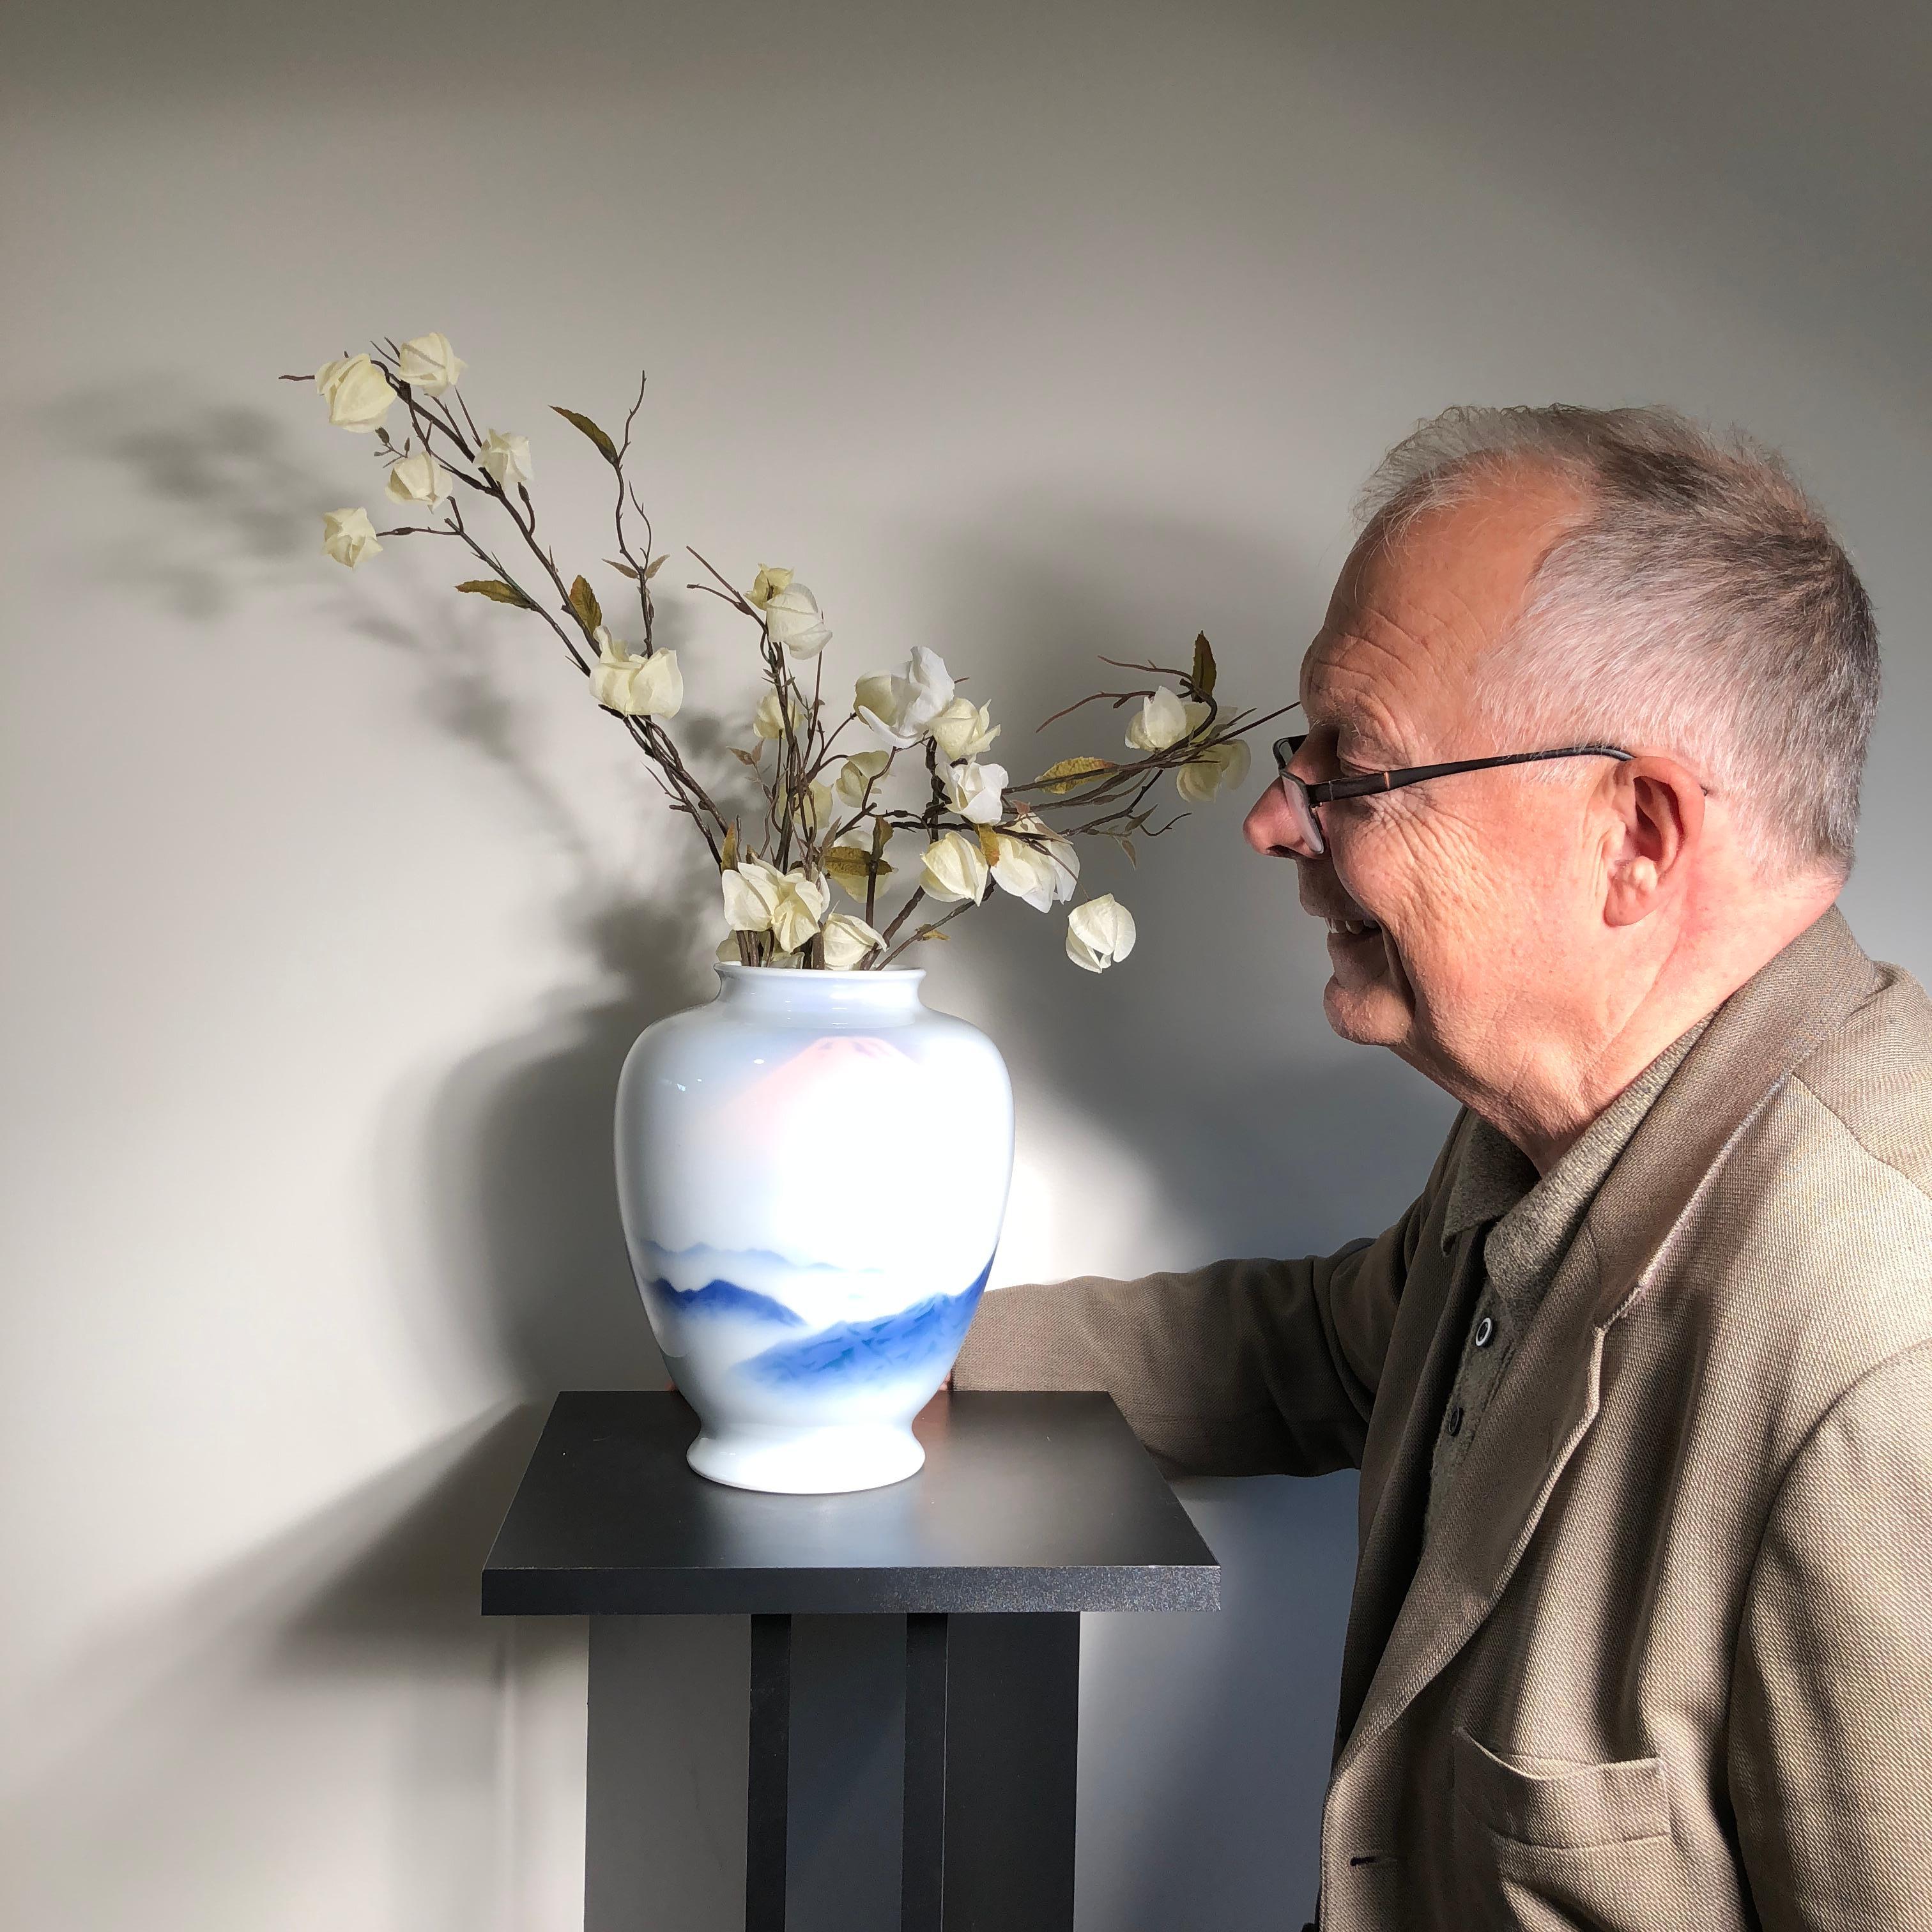 Japanese fine old soft blue mountains porcelain vase, mint, signed and boxed

Maker: Fukagawa Seiji for Fukugawa Arita 

Dimensions: 10 inches tall and 8 inches width

The original signed wooden collector storage box Tomobako included.